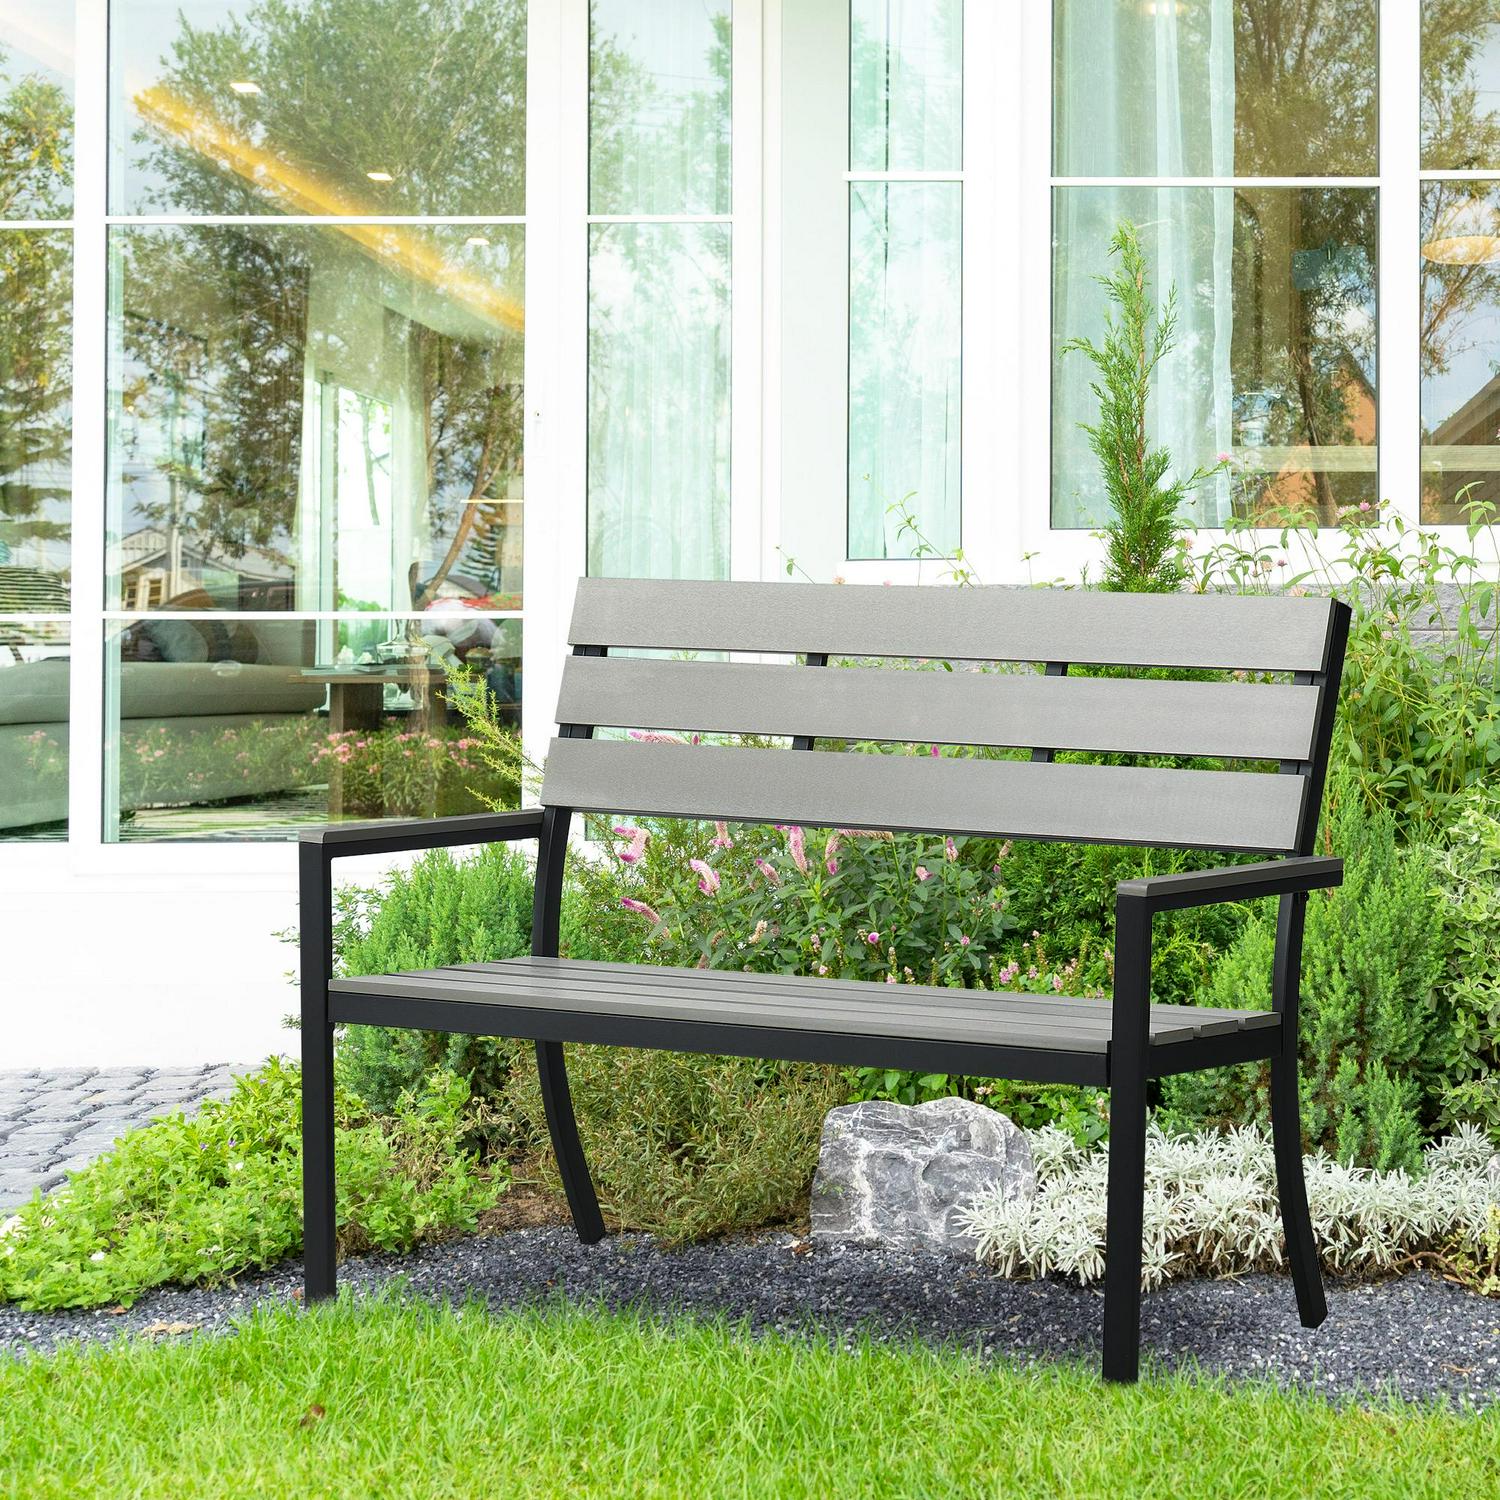 2 Seater Garden Bench, Slatted Outdoor With Steel Frame, Loveseat, (122 X 65 X 92) Cm, Grey